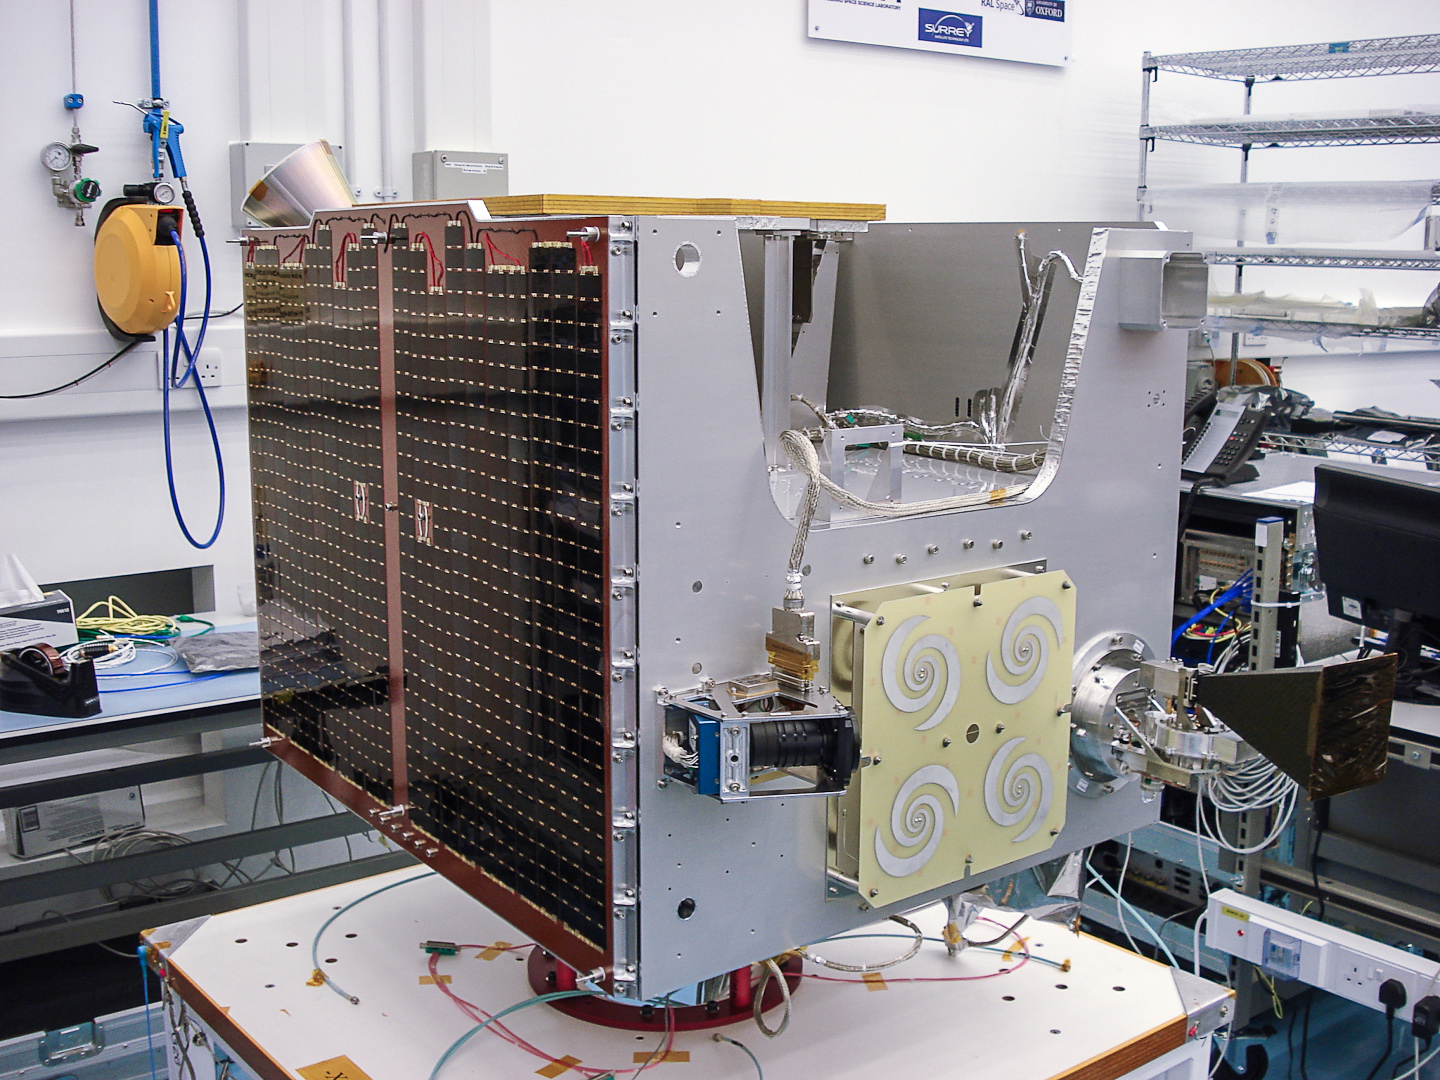 TechDemoSat-1在最后module integration and test phase in SSTL's AIT hall, October 2012